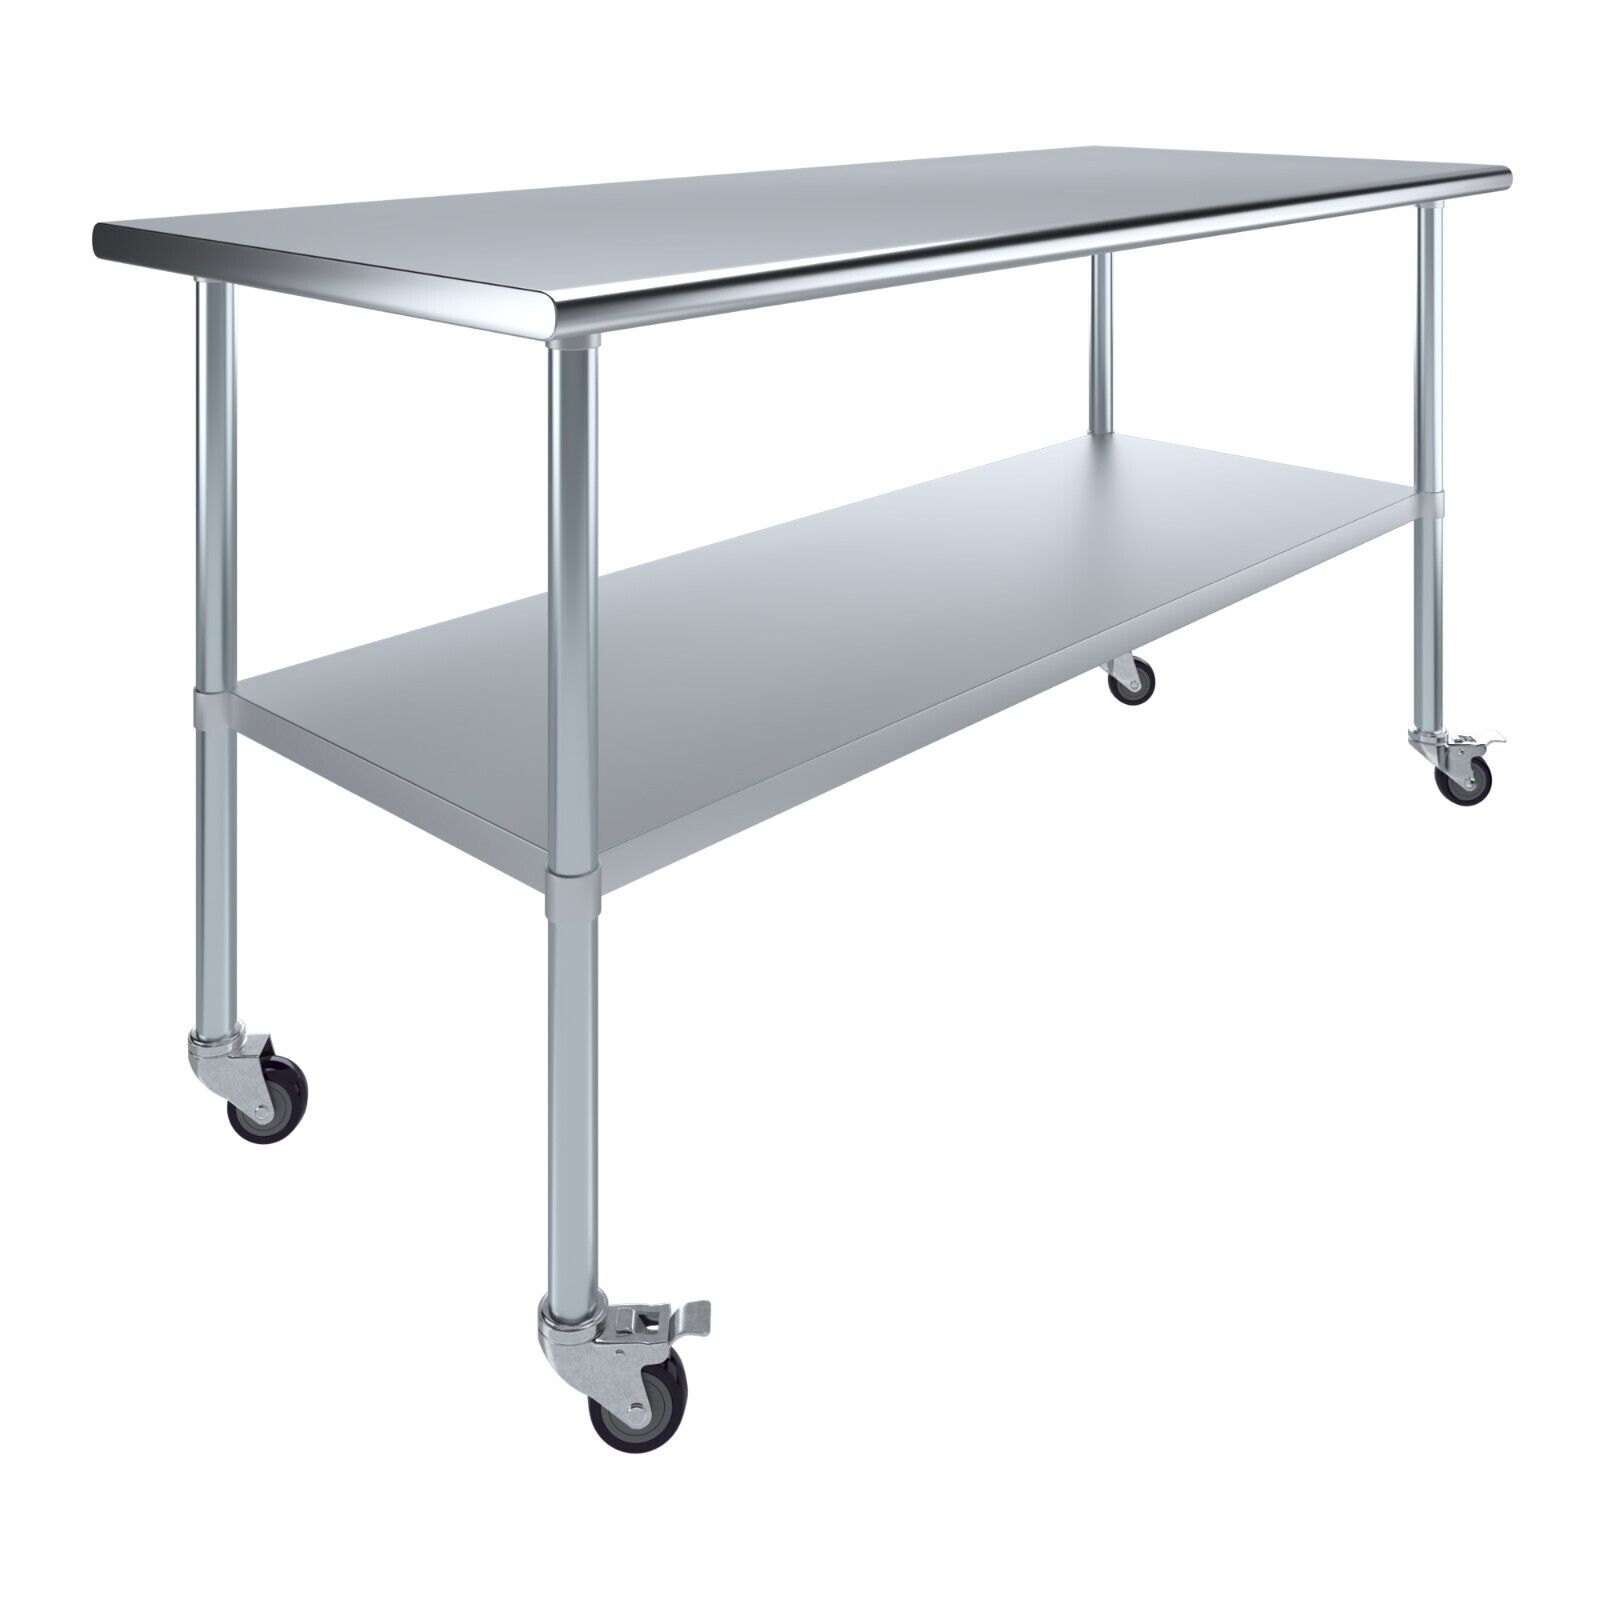 30 in. x 72 in. Stainless Steel Work Table with Wheels | Metal Mobile Food Prep